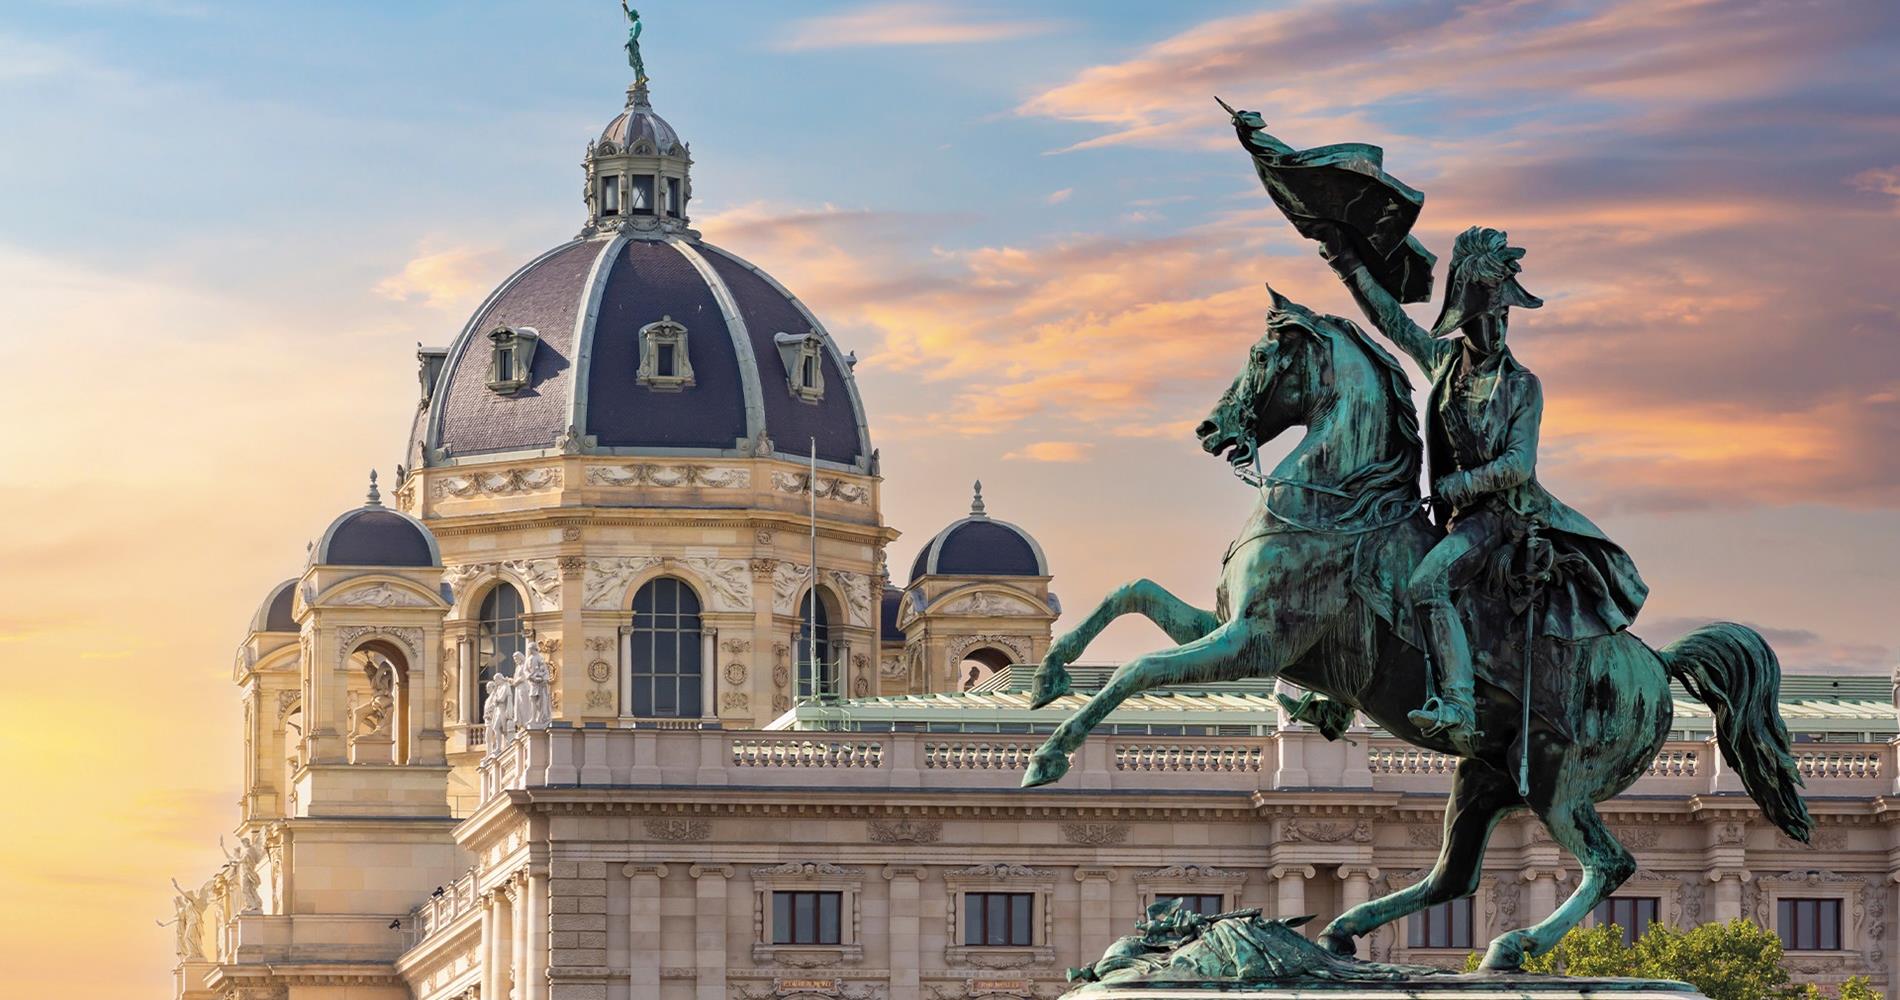 Statue of Archduke Charles Heldenplatz in front of the dome of Museum of Natural history, Vienna, Austria